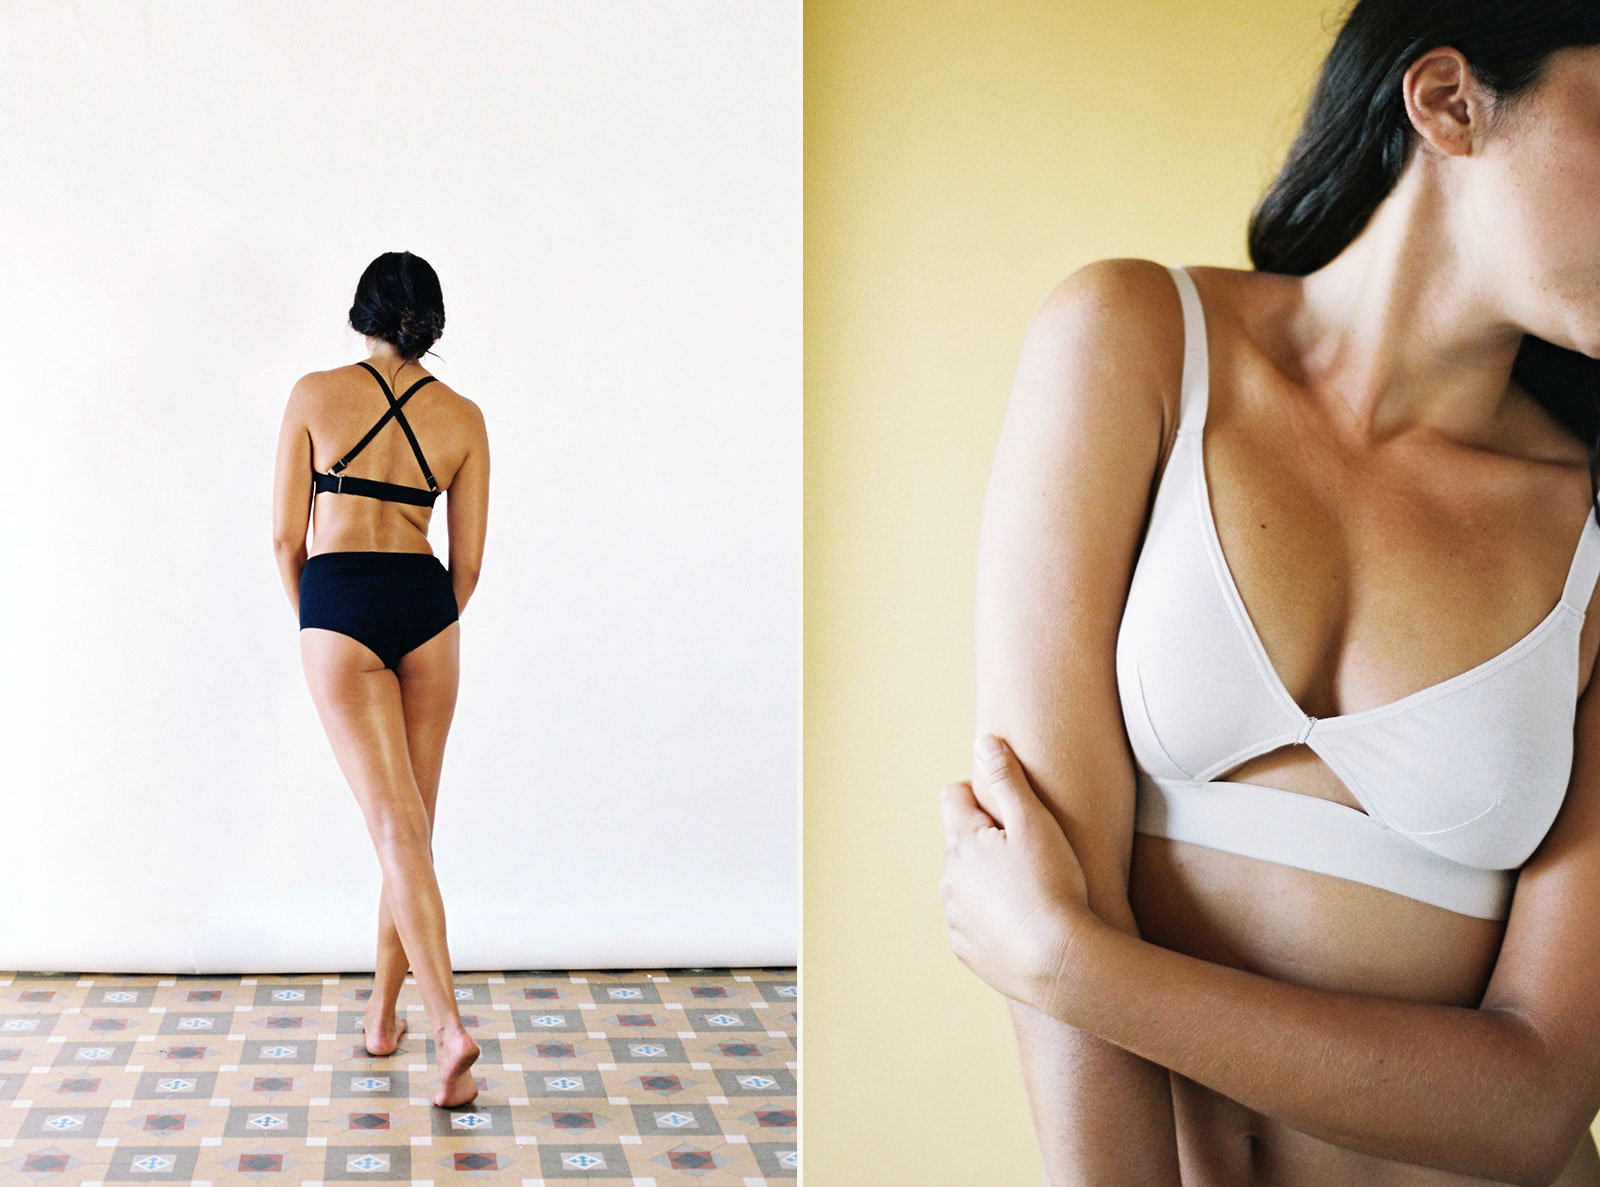 Basic Bra by Nude Label